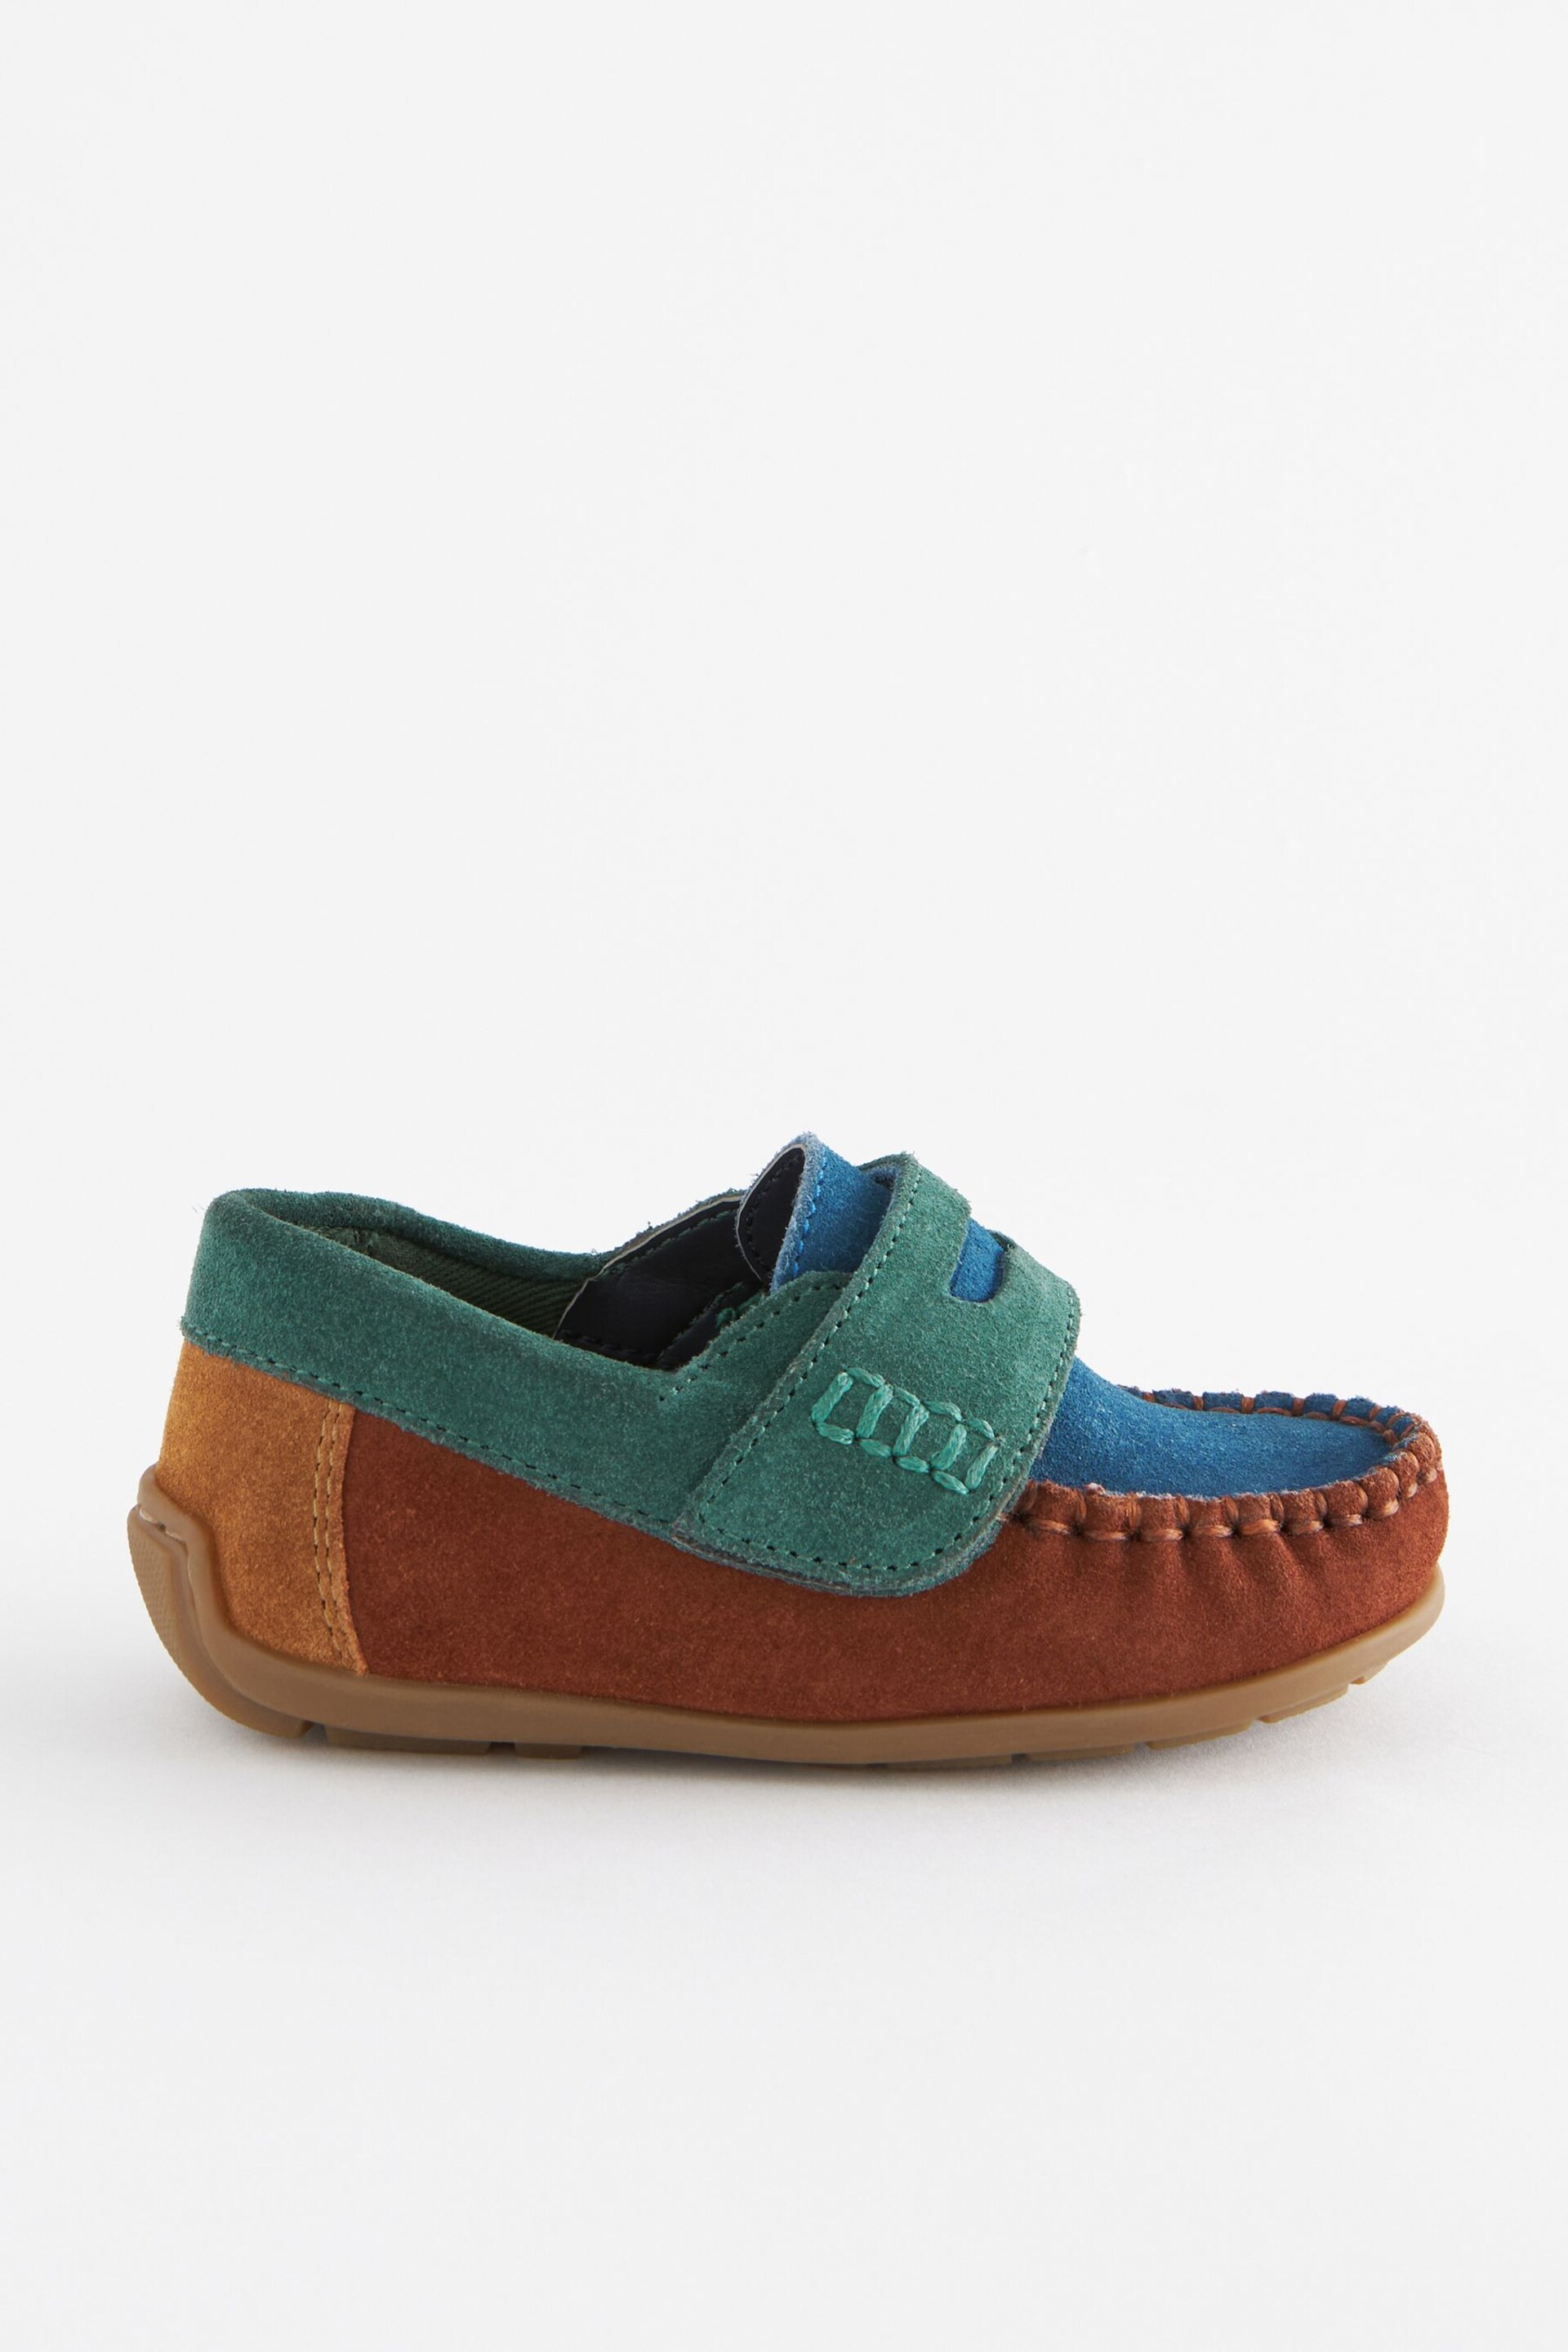 Multi Bright Standard Fit (F) Leather Penny Loafers with Touch and Close Fastening - Image 2 of 5